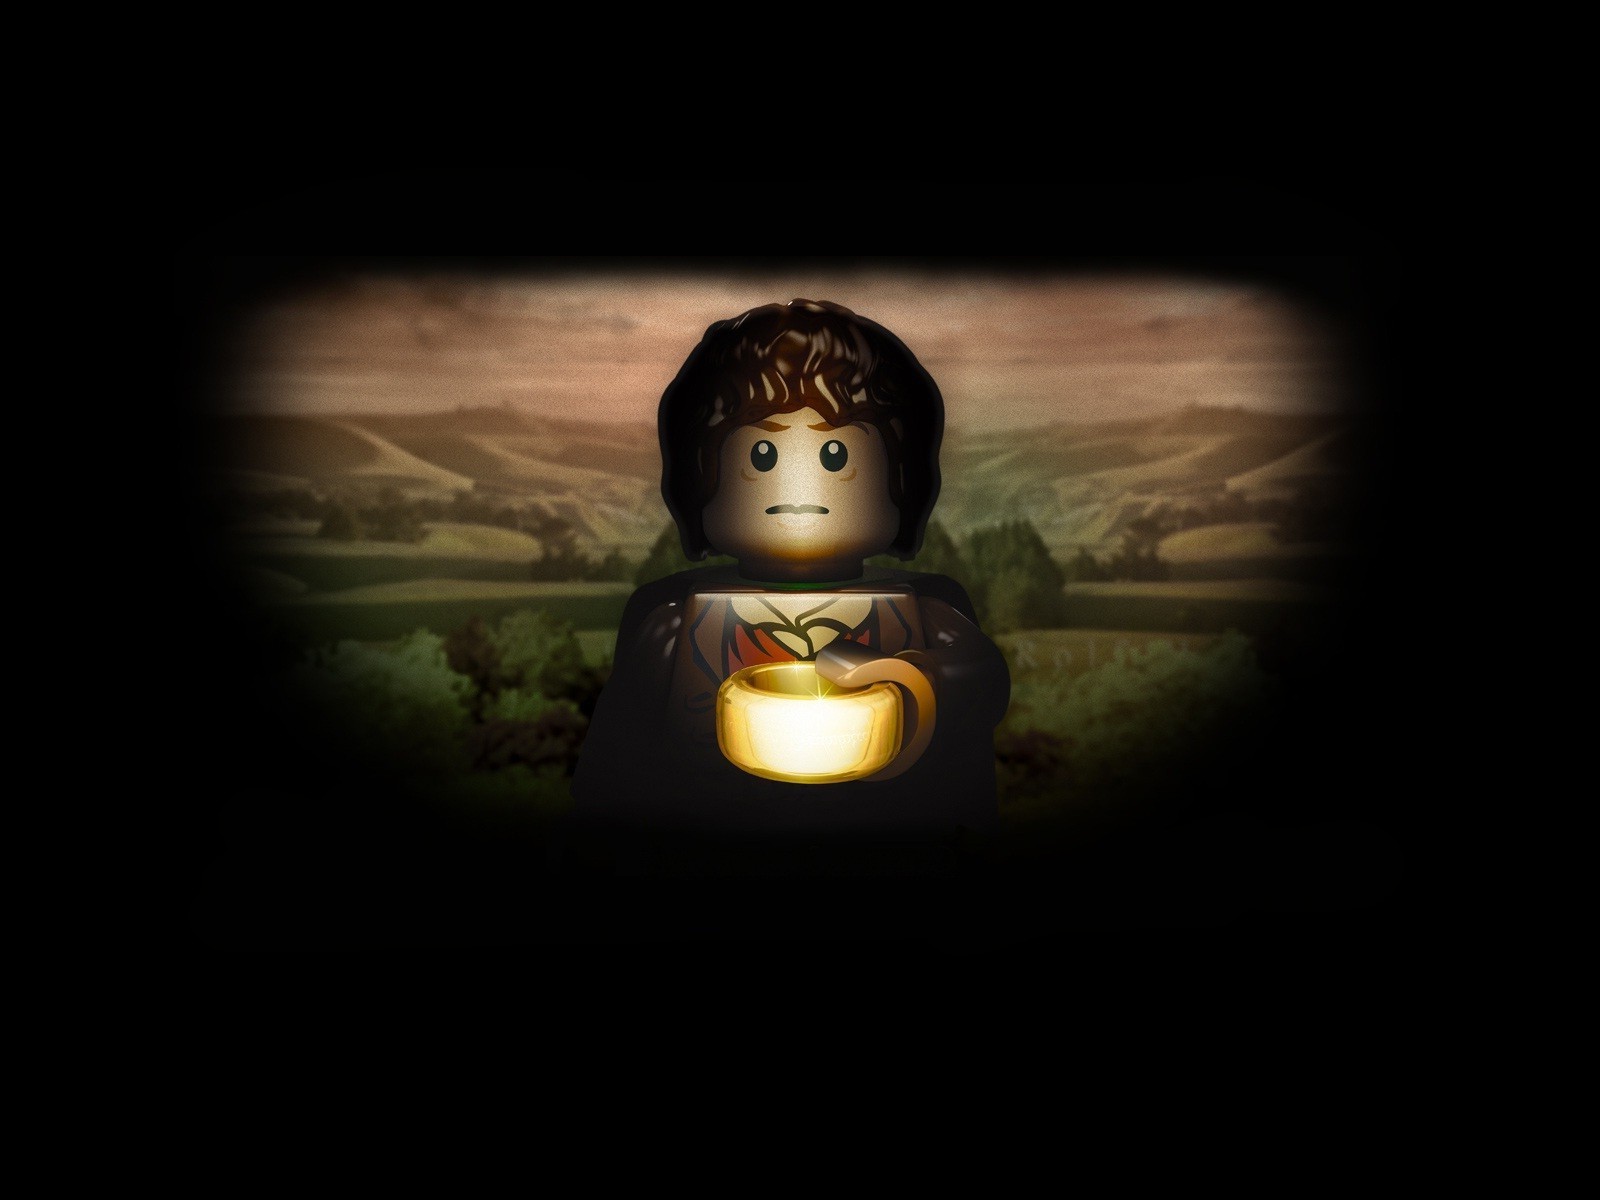 download lego frodo baggins for free